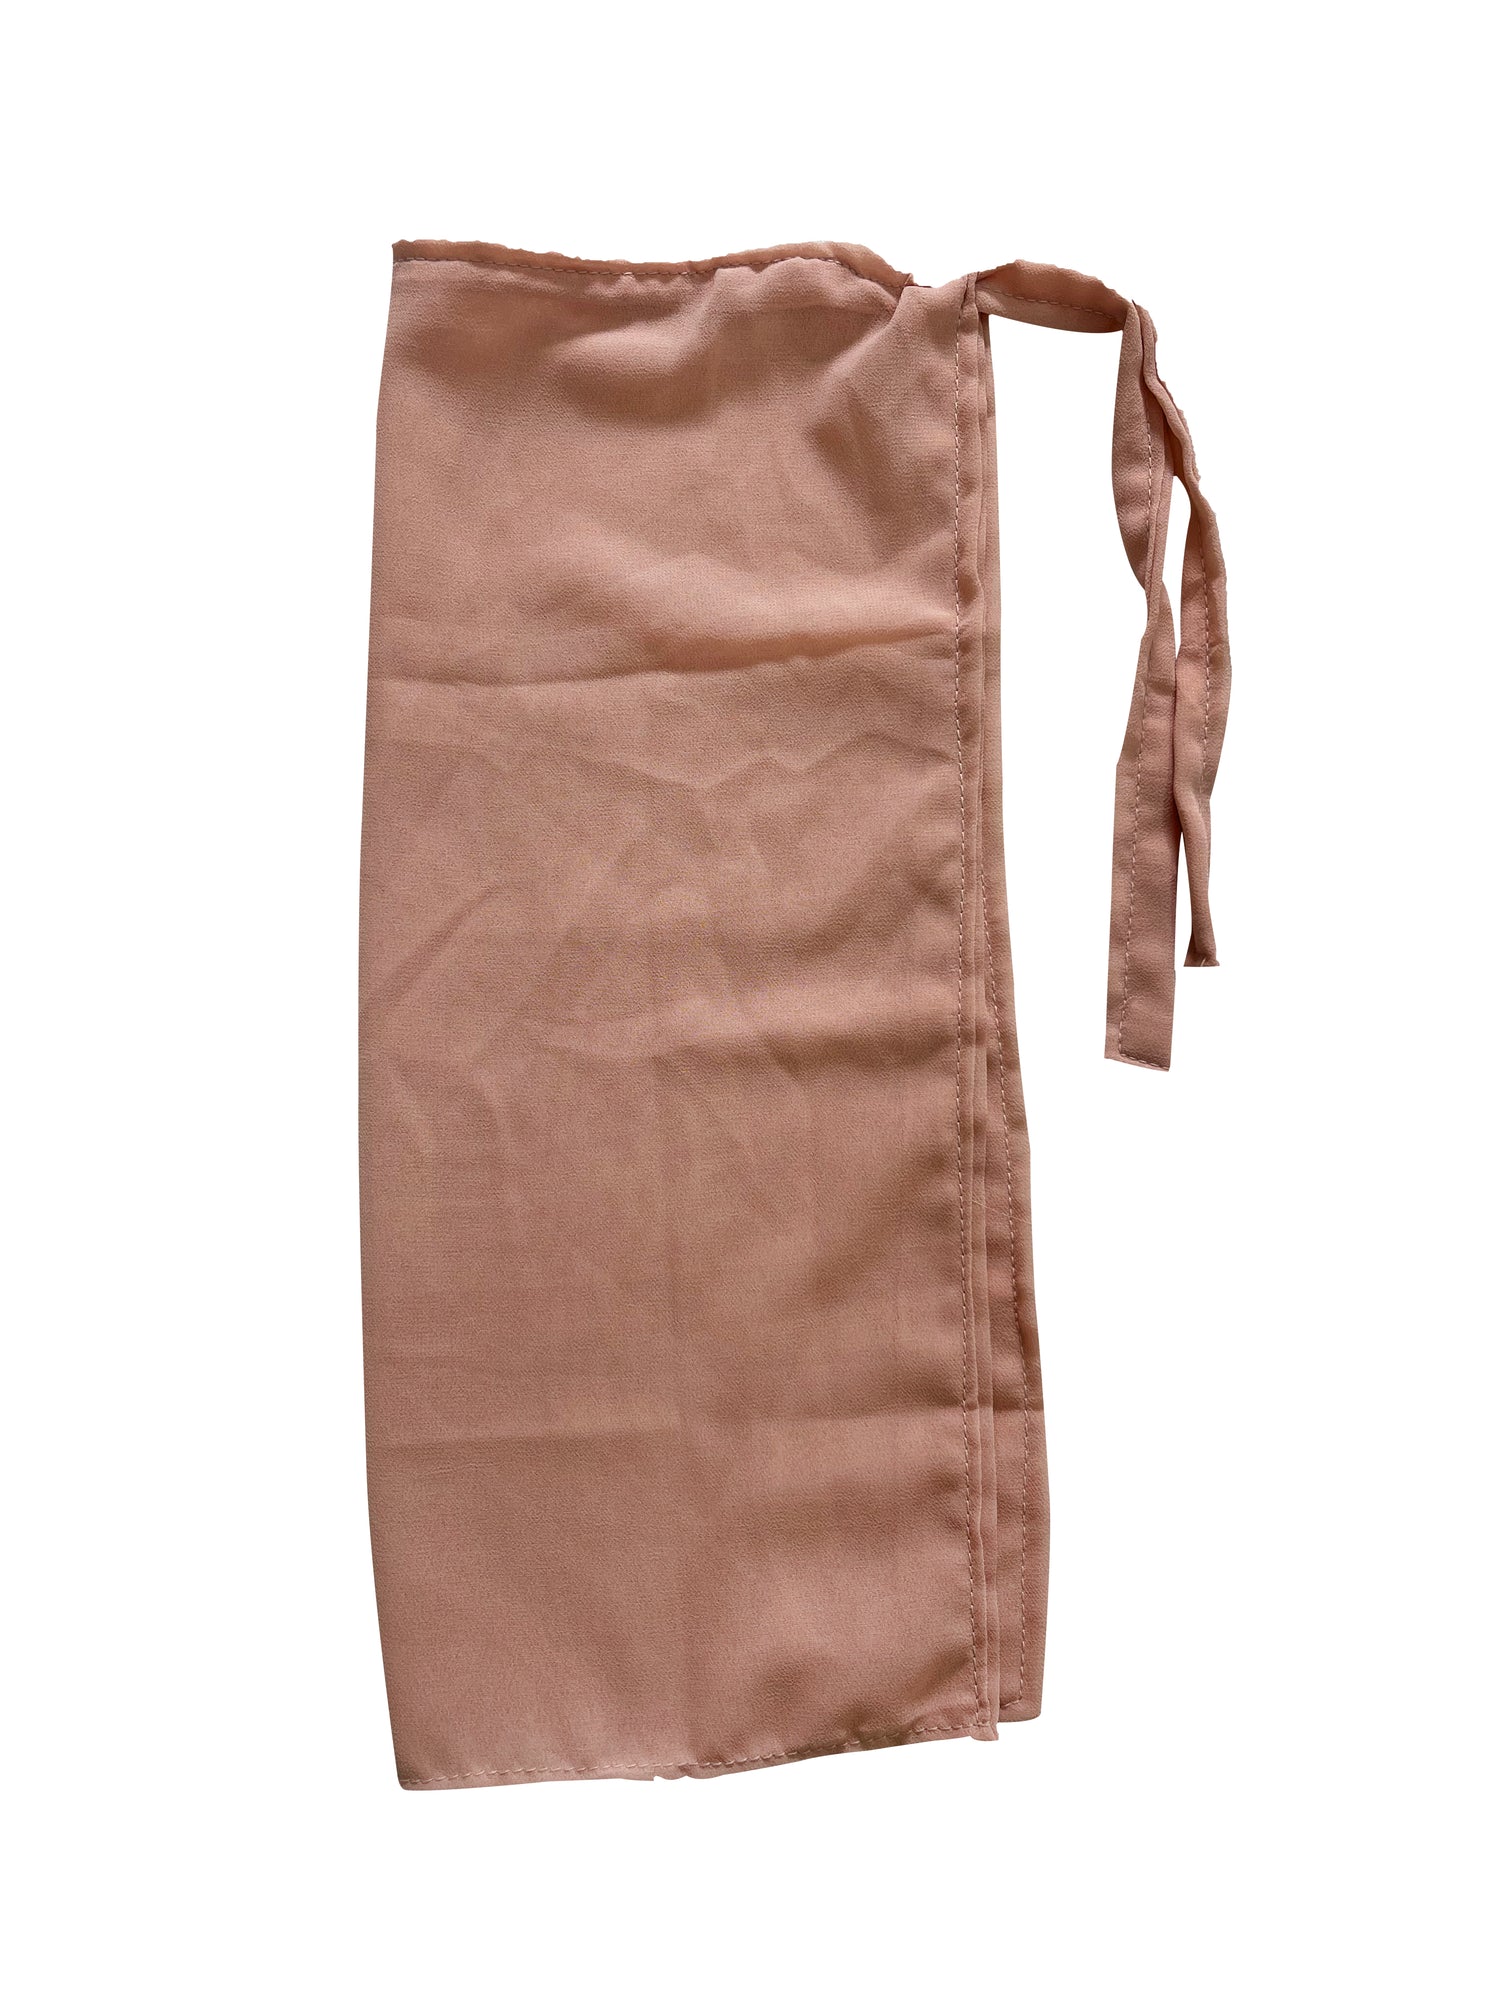 Tie Back Niqab in Dusty Pink